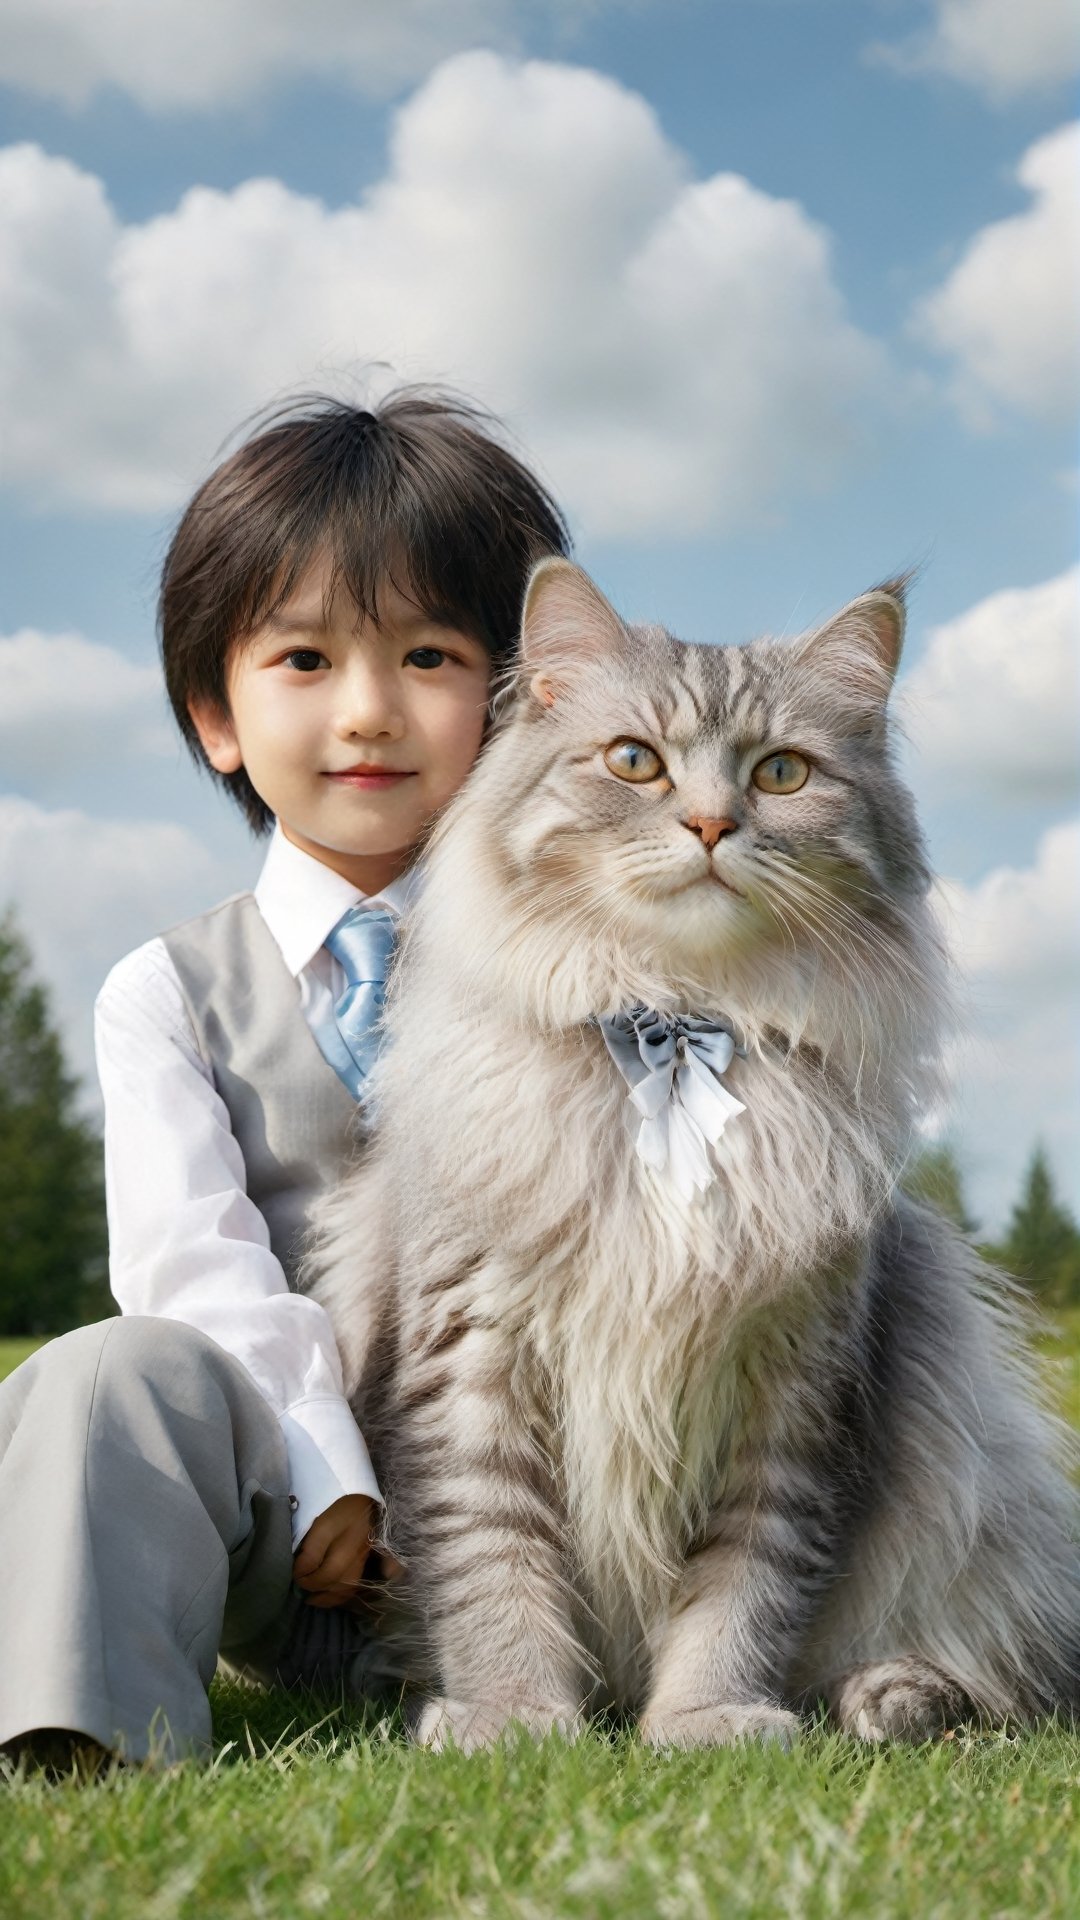 A cute silver longhaired cat, wearing white vest and tie, sitting on the grass with an Asian little boy in front of it. The background is blue sky and white clouds, with a dreamy atmosphere. High definition photography style, natural light, soft tones, medium focus lens, high resolution. A joyful expression,glitter